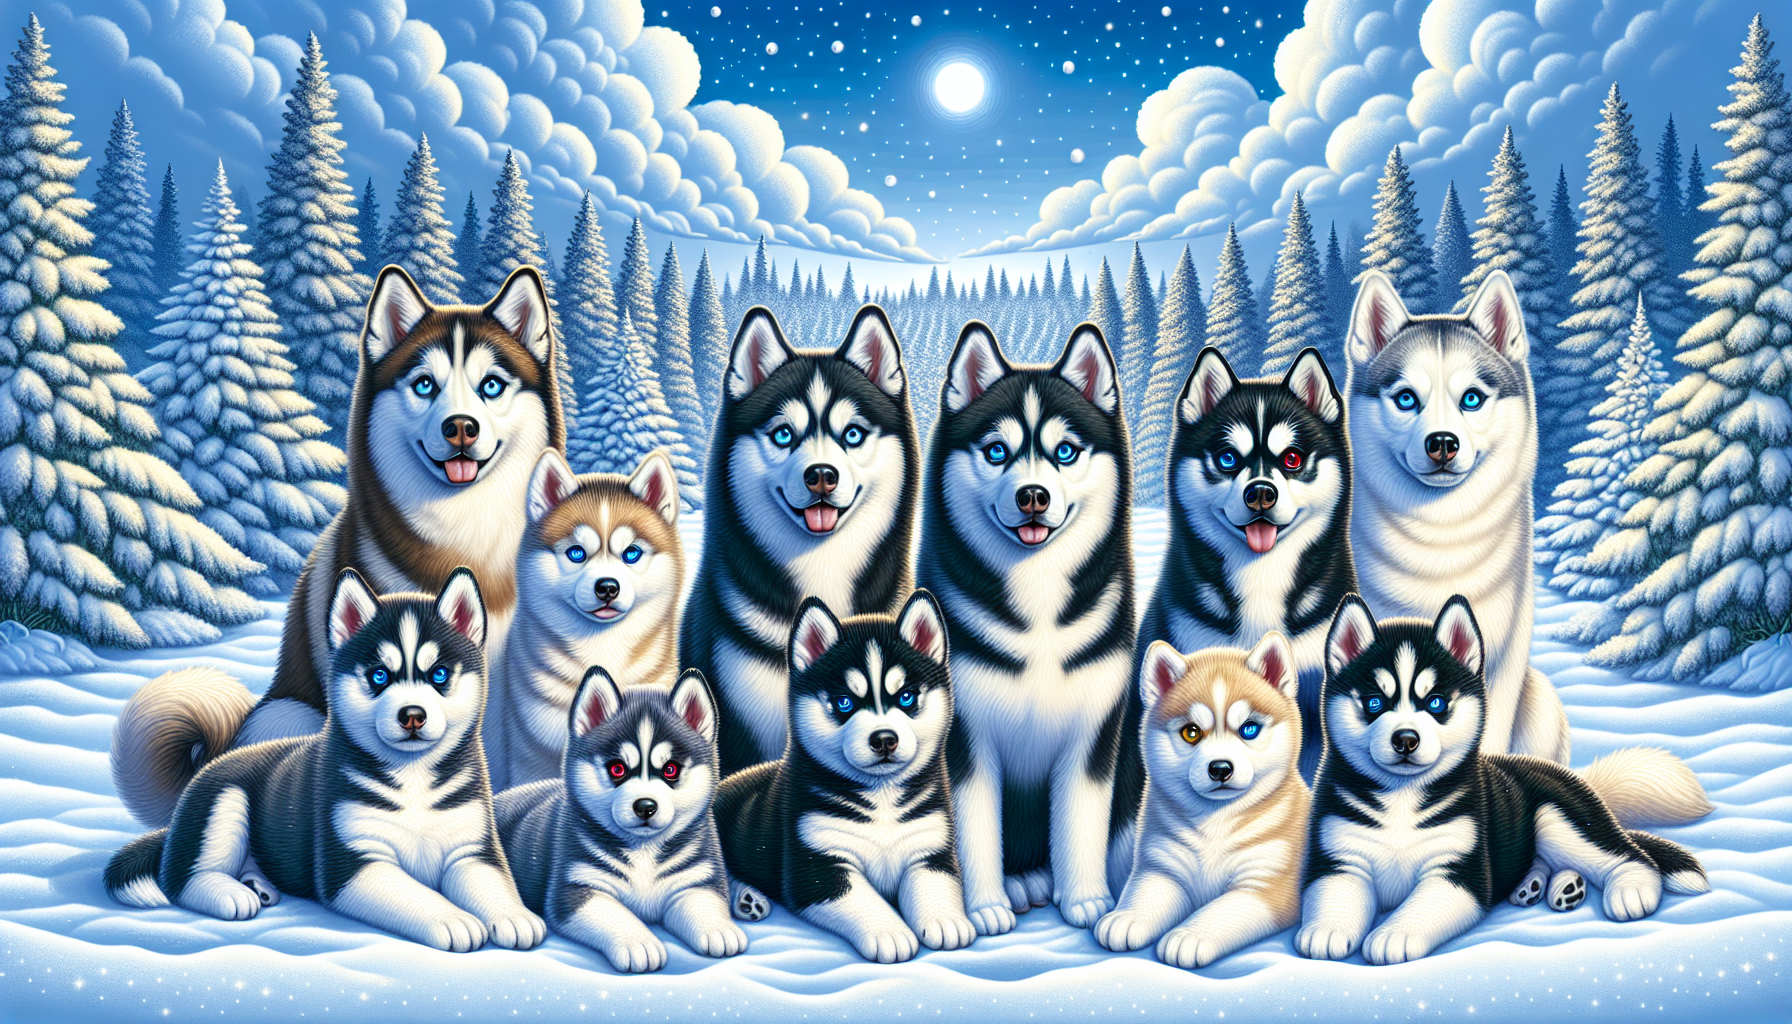 Group of Siberian Huskies in snowy forest.